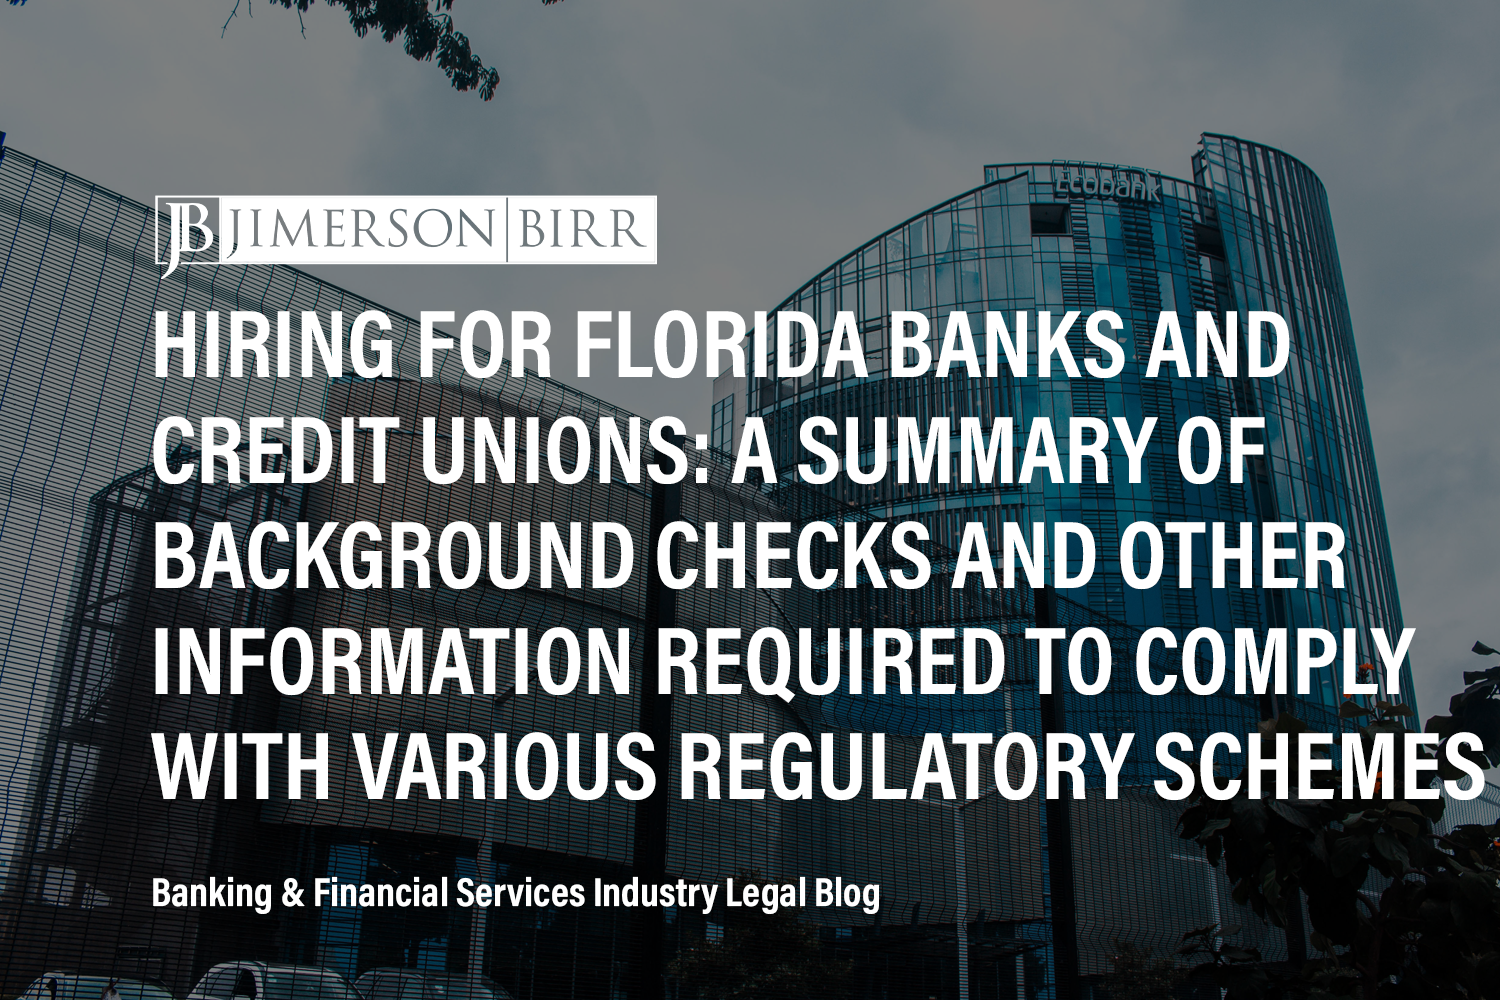 Hiring for Florida Banks and Credit Unions: A Summary of Background Checks and Other Information Required to Comply With Various Regulatory Schemes